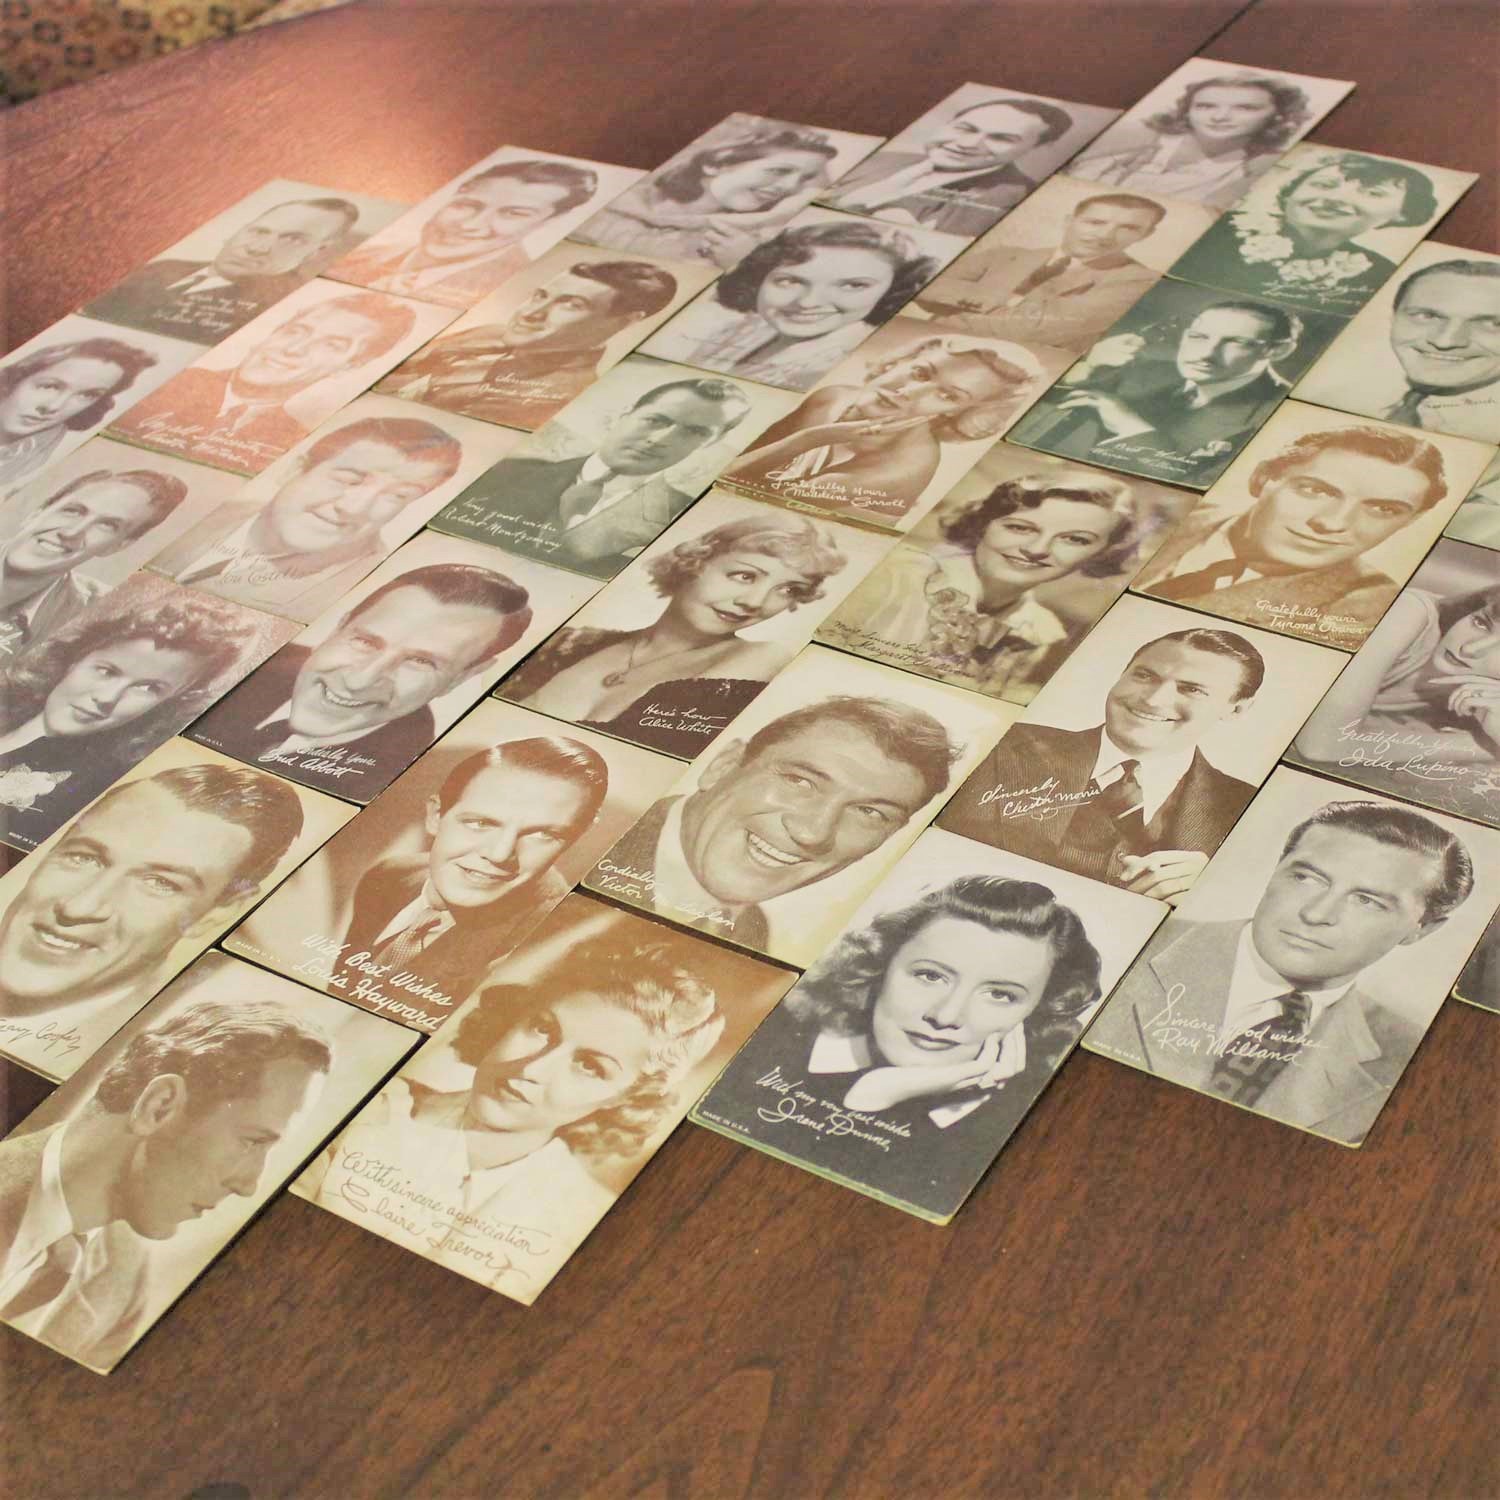 Collection of 95 Vintage Movie Star Penny Arcade Trading Cards